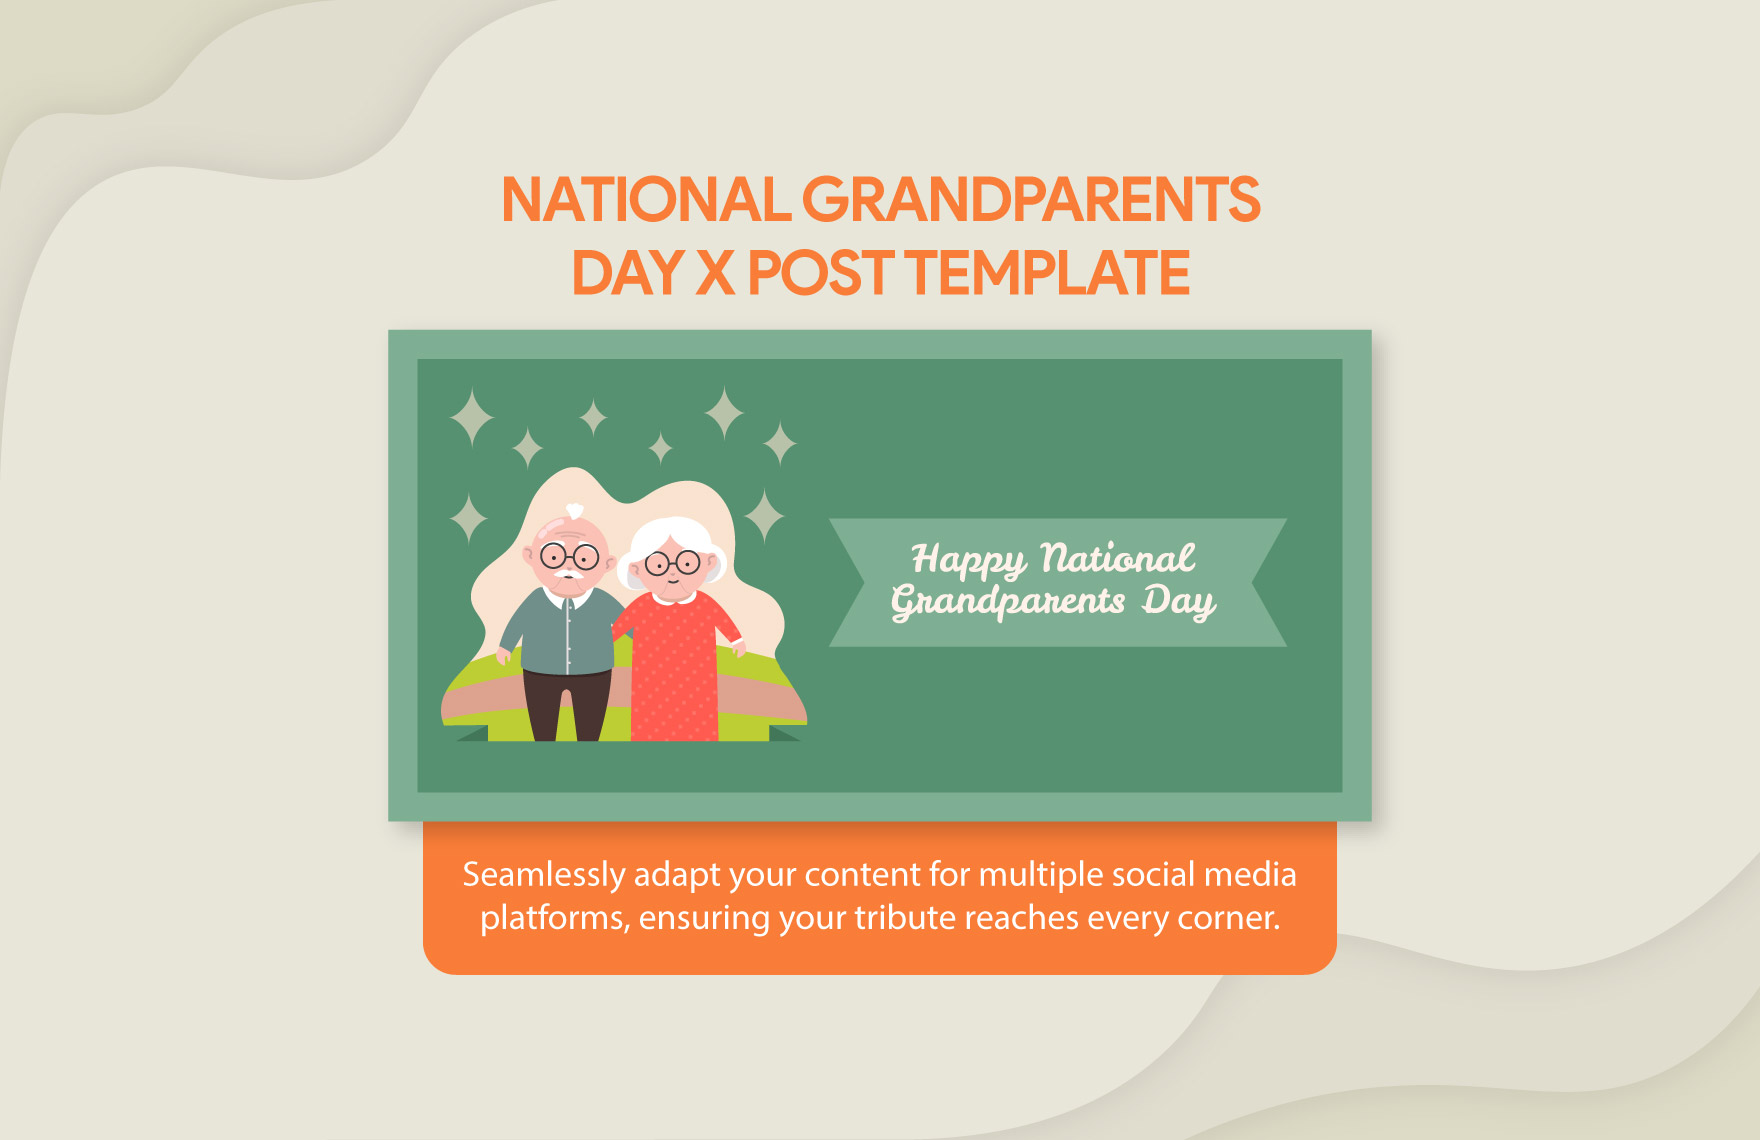 Free National Grandparents Day X Post Template in Illustrator, PSD, PNG